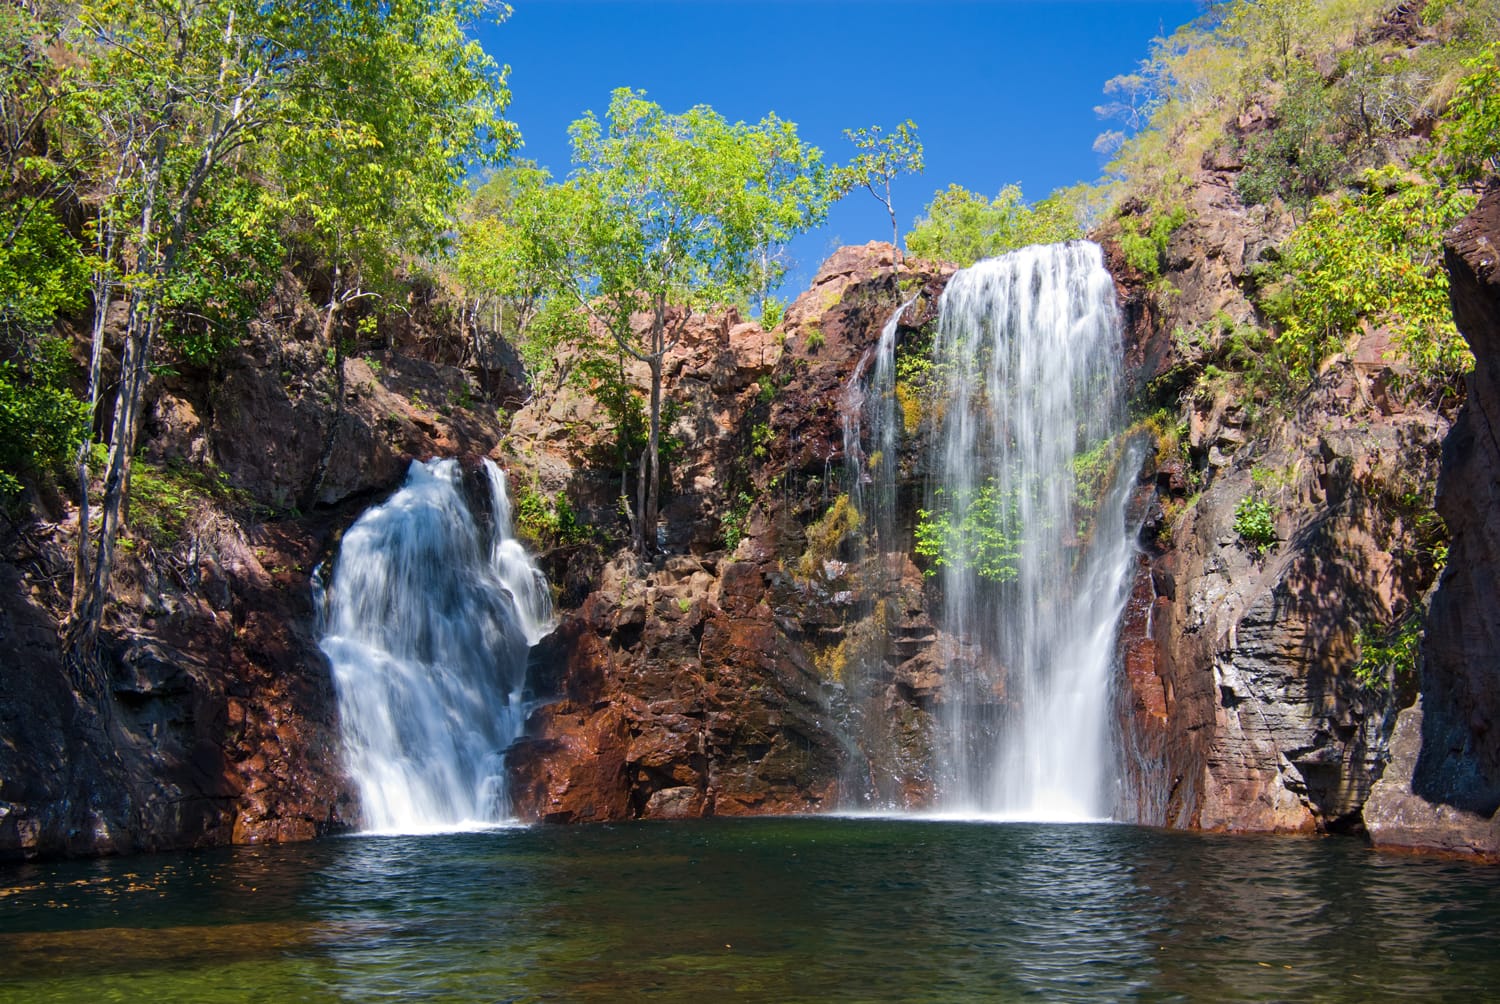 The beautiful Florence Falls in Litchfield National Park, with cool swimming hole at base. Northern Territory, Australia